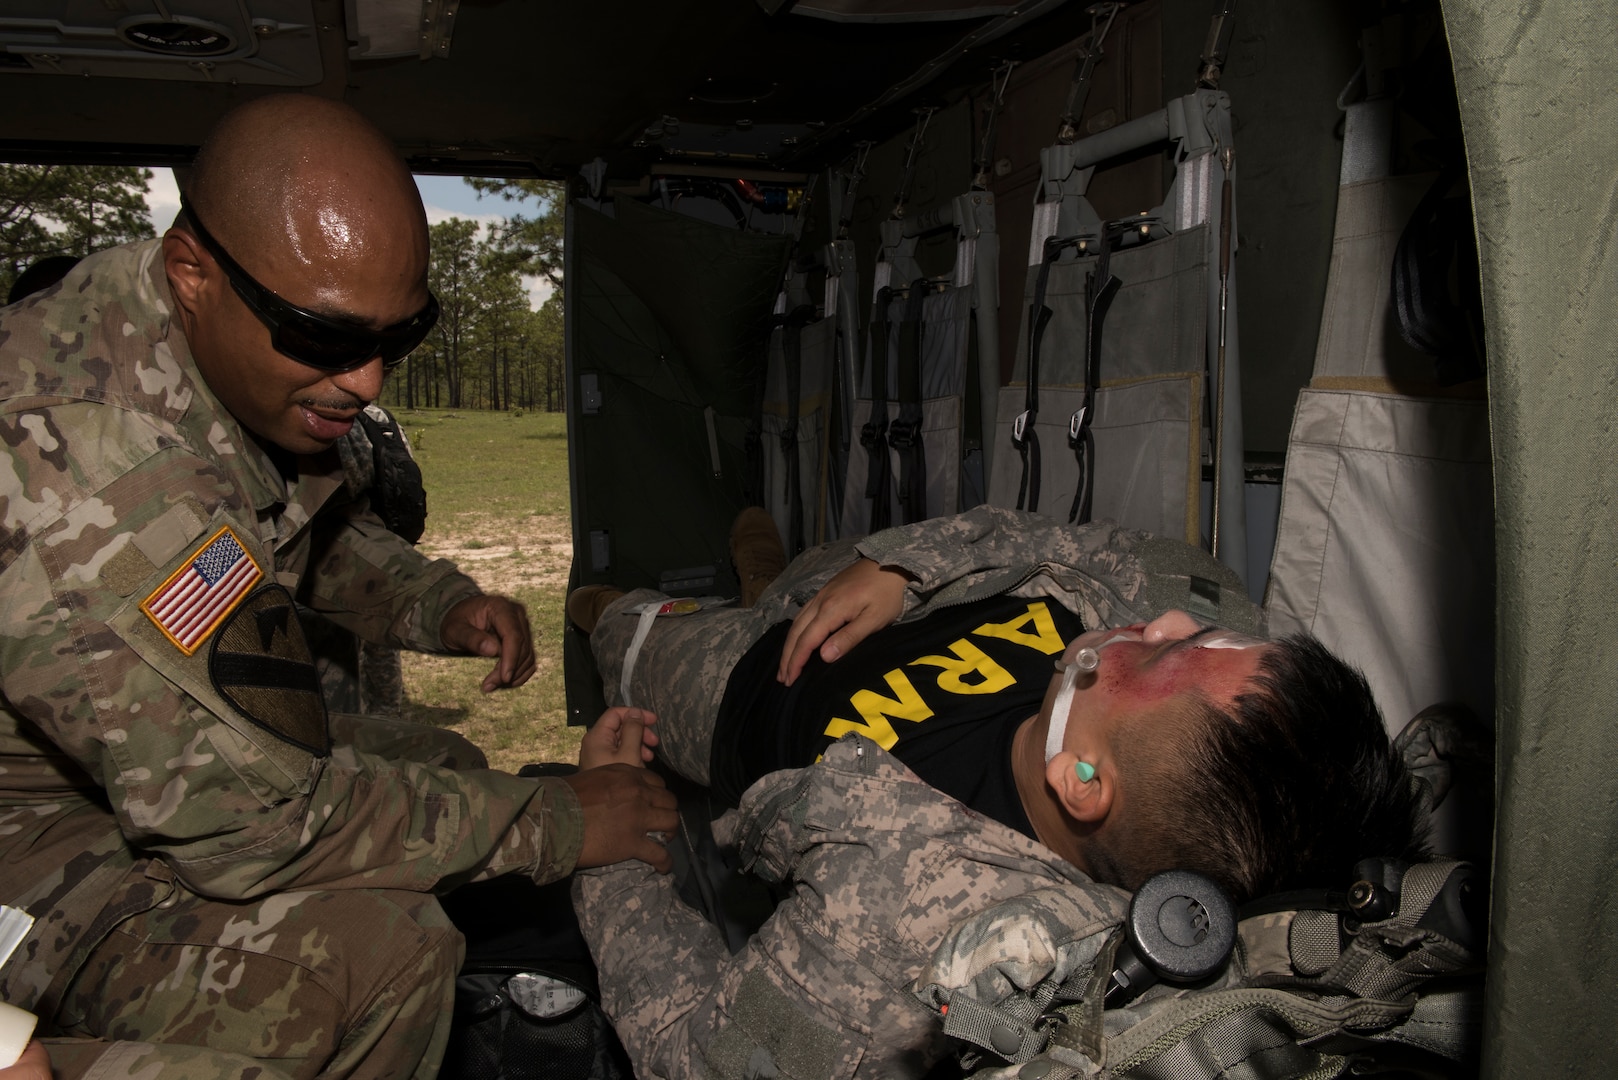 U.S. Army Sgt. 1st Class Phillip Webb, 1st Battalion 228th Aviation Regiment detachment first sergeant, feels for the pulse of a simulated aircraft casualty during a search and rescue exercise, May 21, 2019, in Comayagua, Honduras. Members from various units on Joint Task Force – Bravo participated in the exercise that simulated a HH-60 Blackhawk crashed during a routine flight carrying personnel. The exercise practiced notification, recall, search and rescue, on-scene medical care, recovery of personnel from low and high angle austere terrain, and medical care once the injured returned to base. (U.S. Air Force photo by Staff Sgt. Eric Summers Jr.)